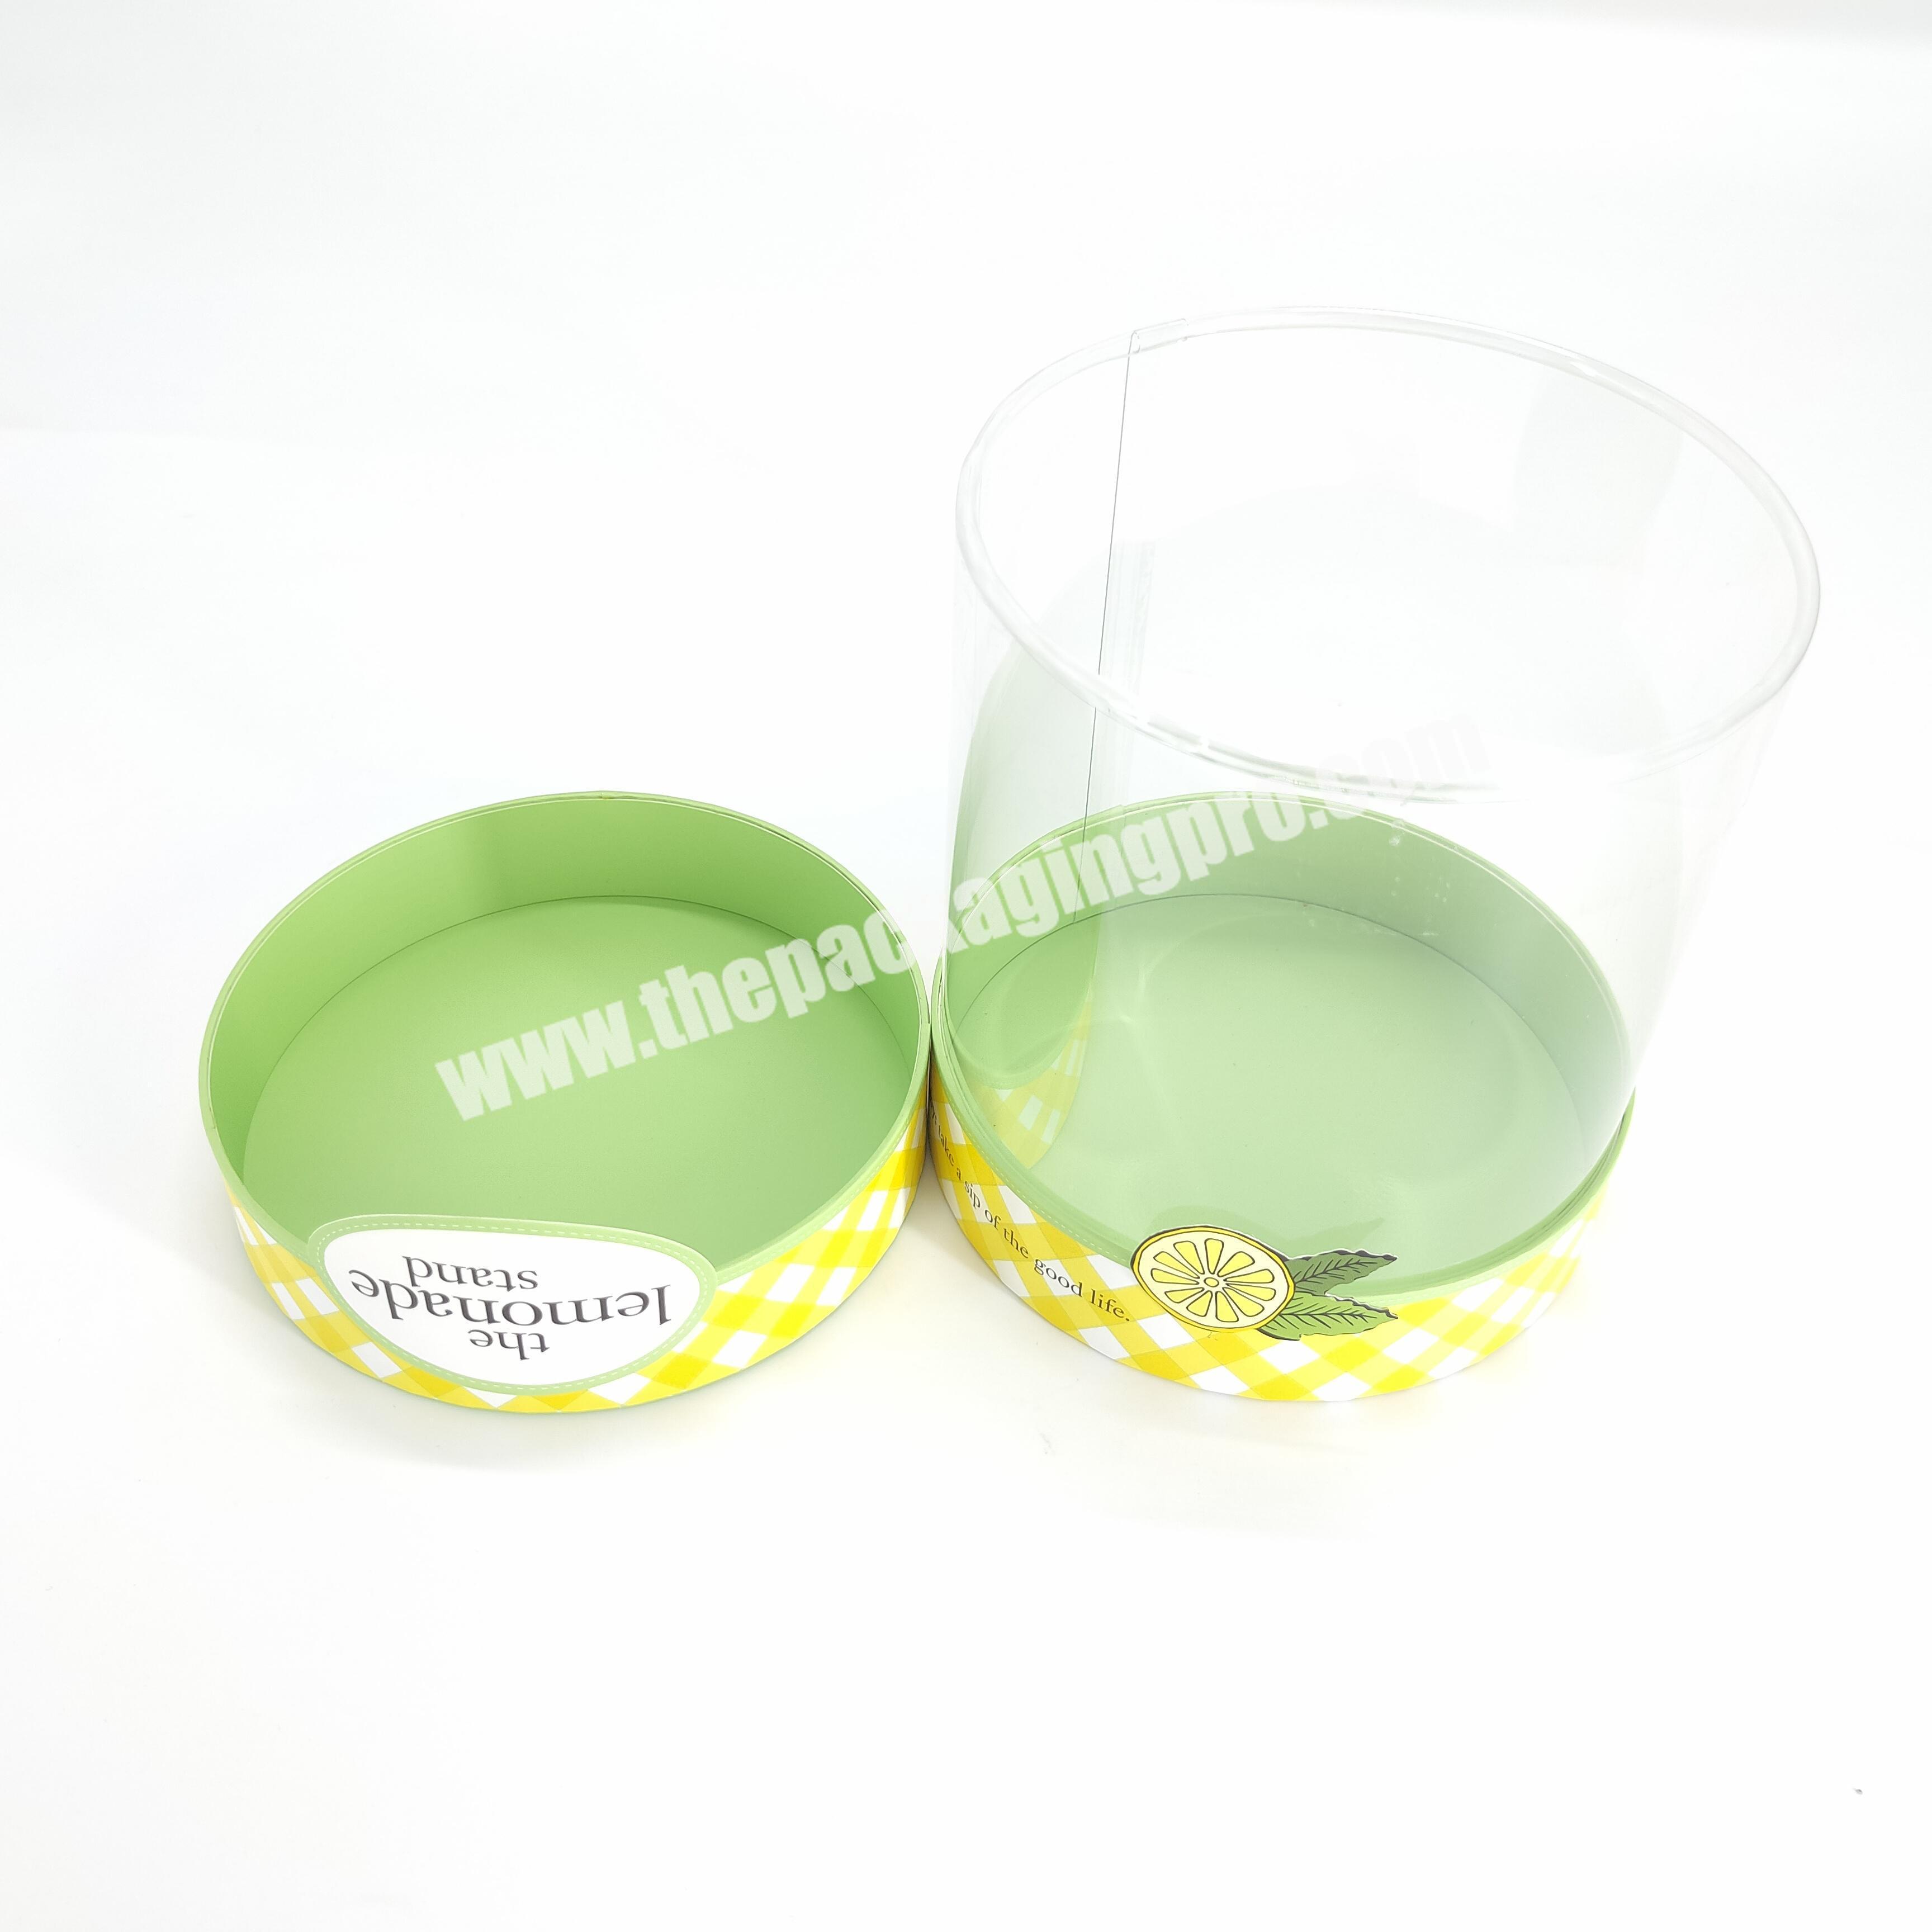 Factory direct high quality transparent gift box with graphic design